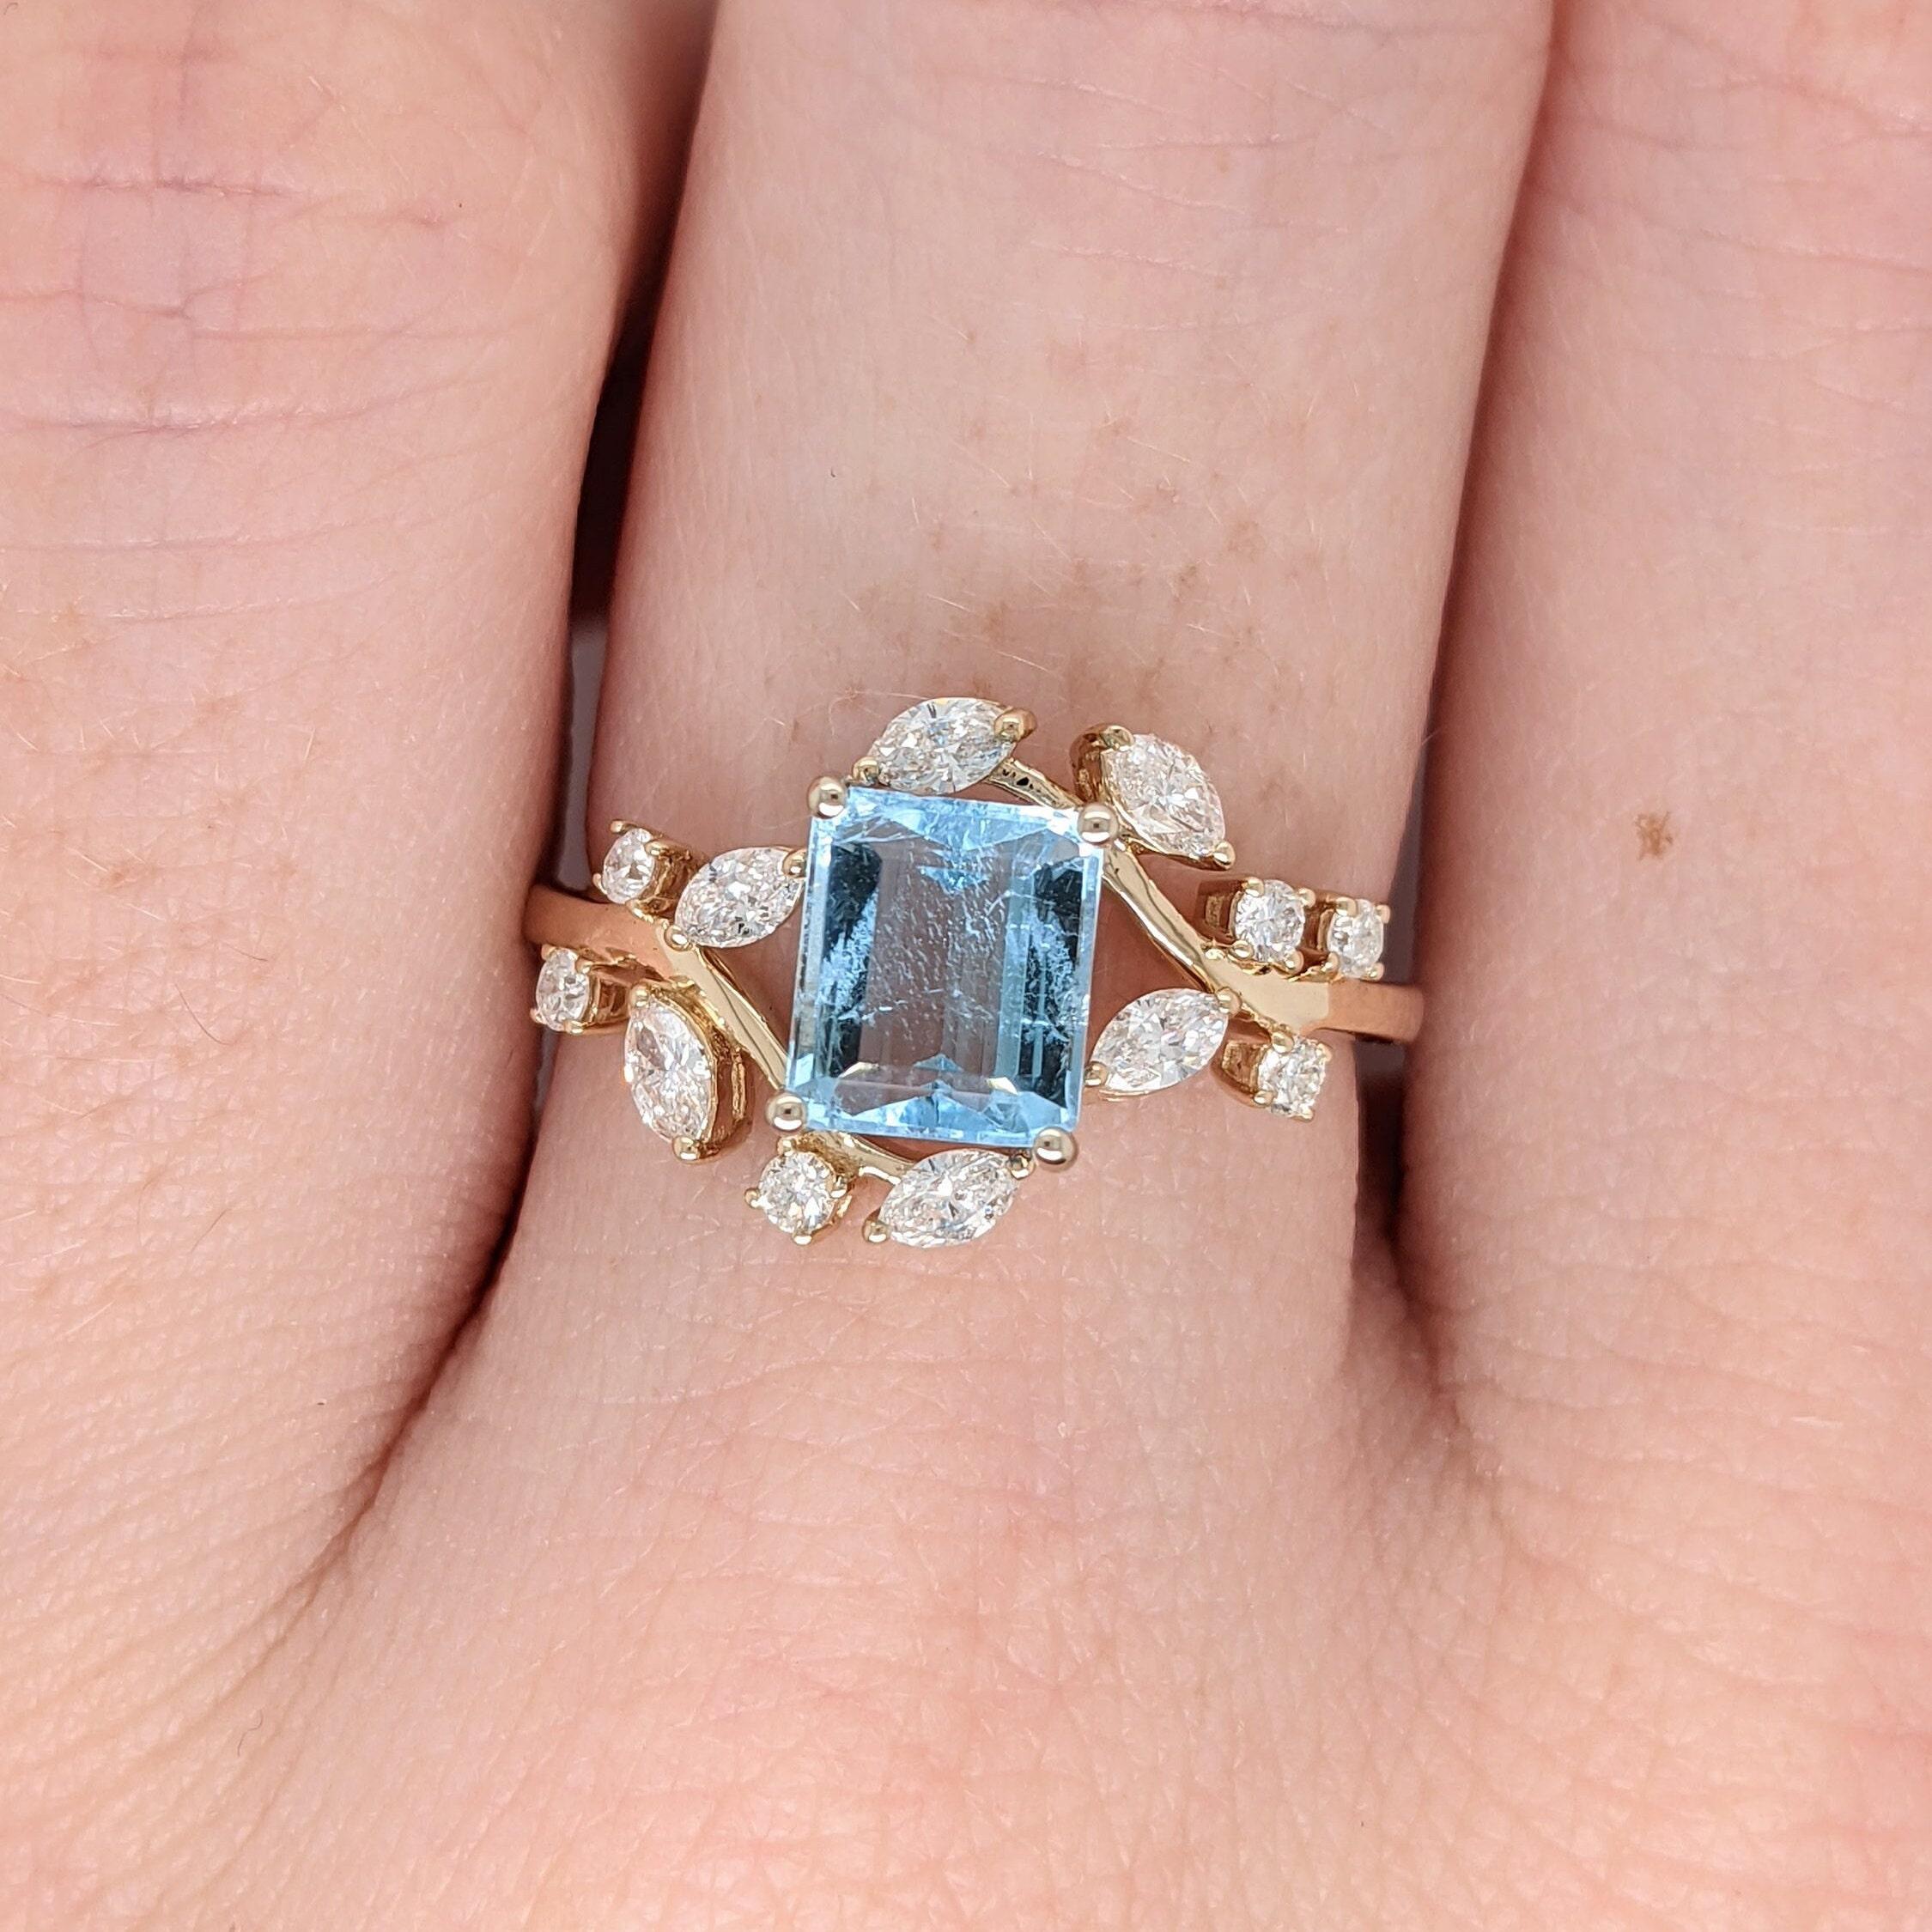 A gorgeous sea blue aquamarine from the famed mines of Santa Maria set in a unqie bypass natured theme ring setting in 14k yellow gold with all natural earth mined diamond accents. The perfect engagement ring as well as a graduation or birthday